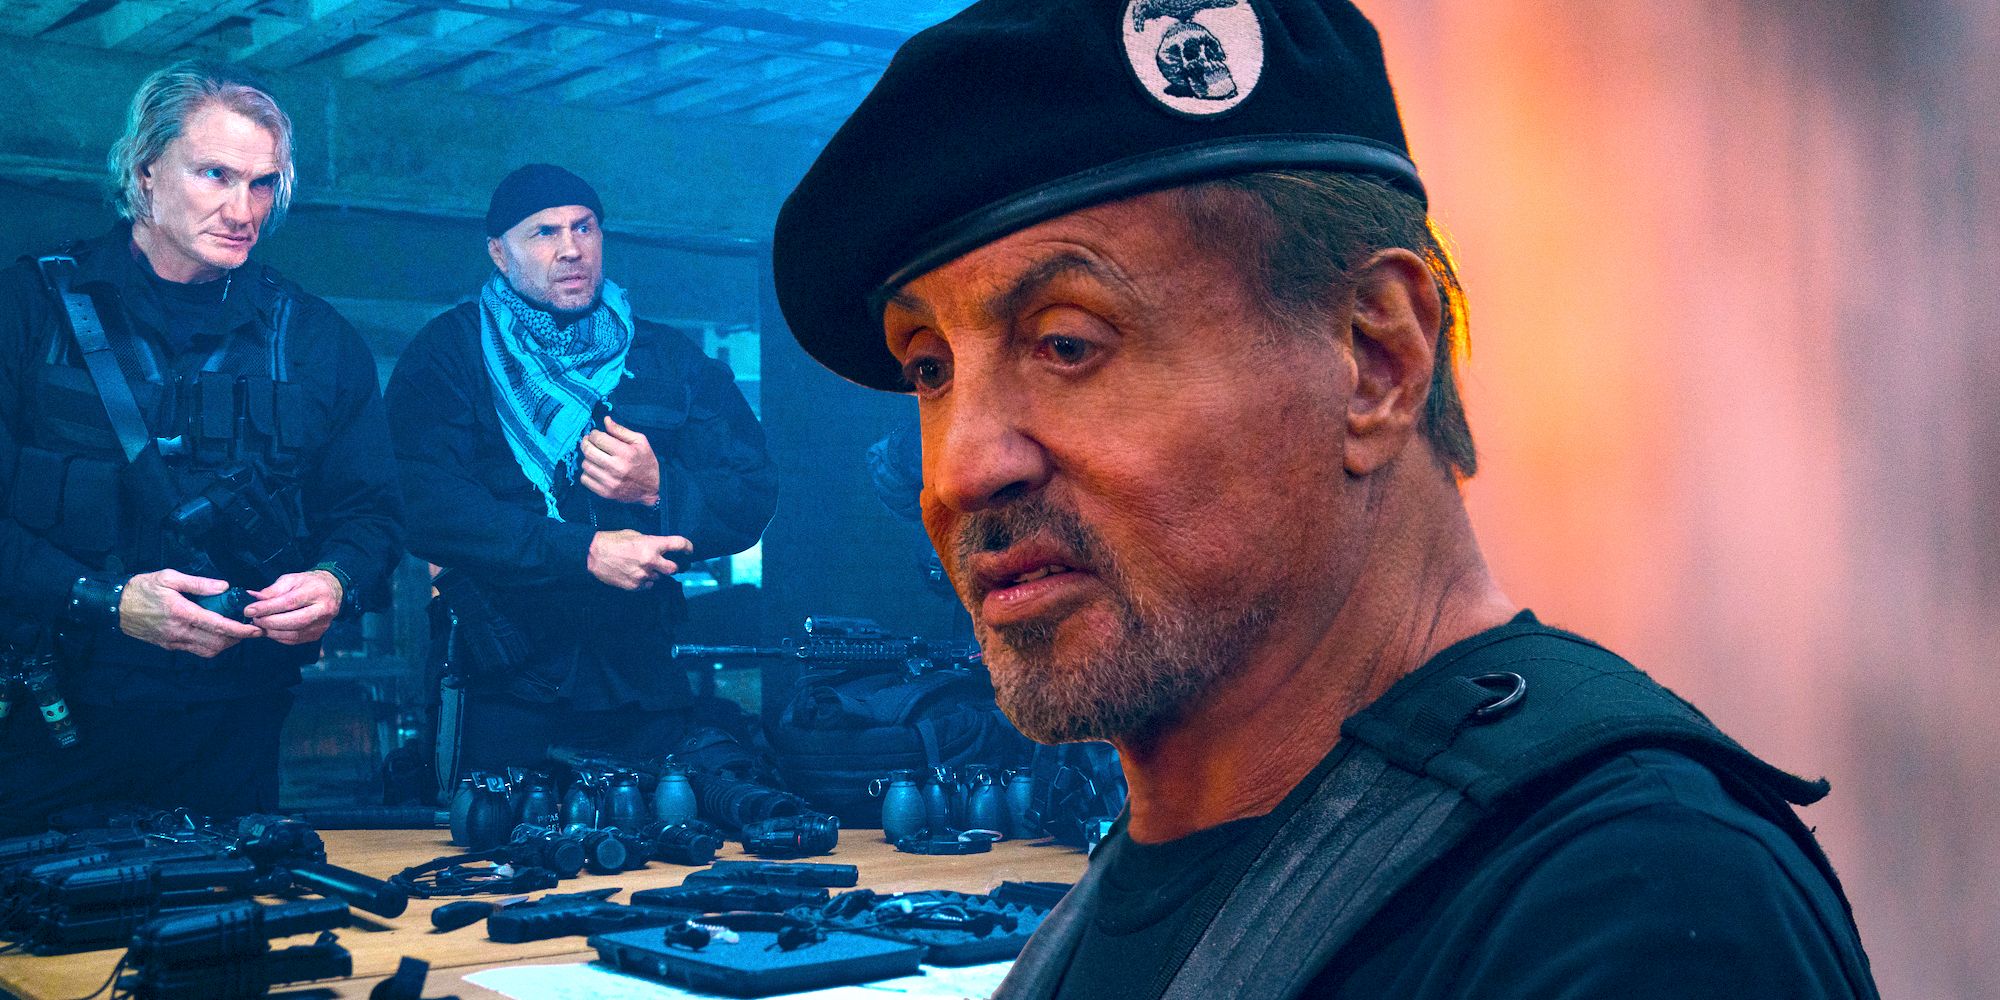 9 Reasons The Expendables 4 Bombed At The Box Office Despite 800M